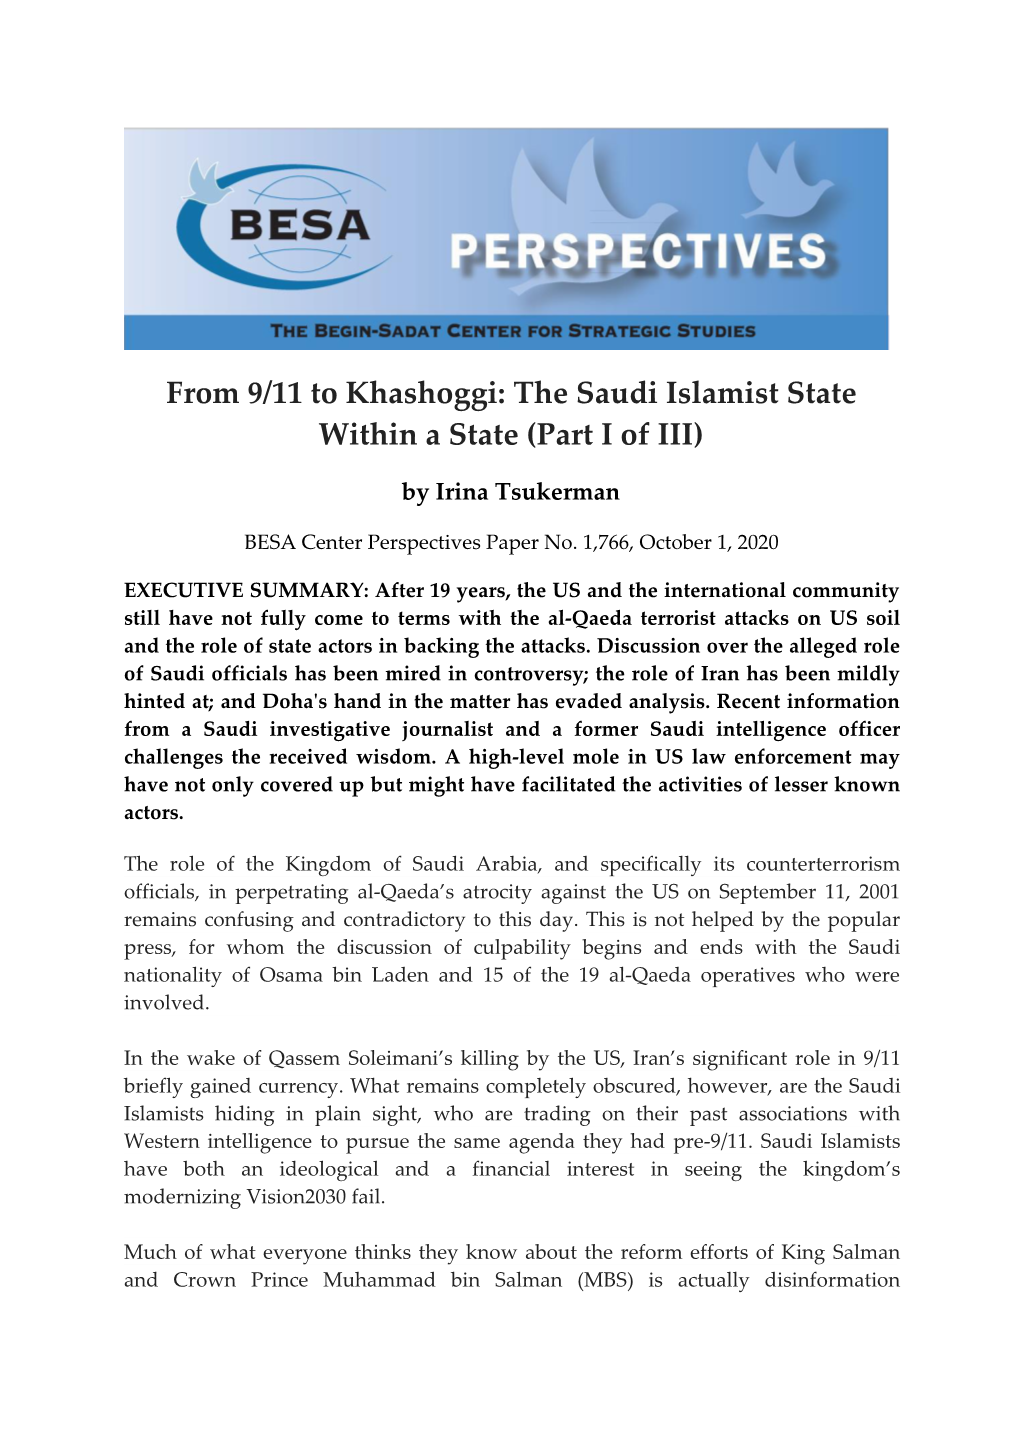 From 9/11 to Khashoggi: the Saudi Islamist State Within a State (Part I of III)